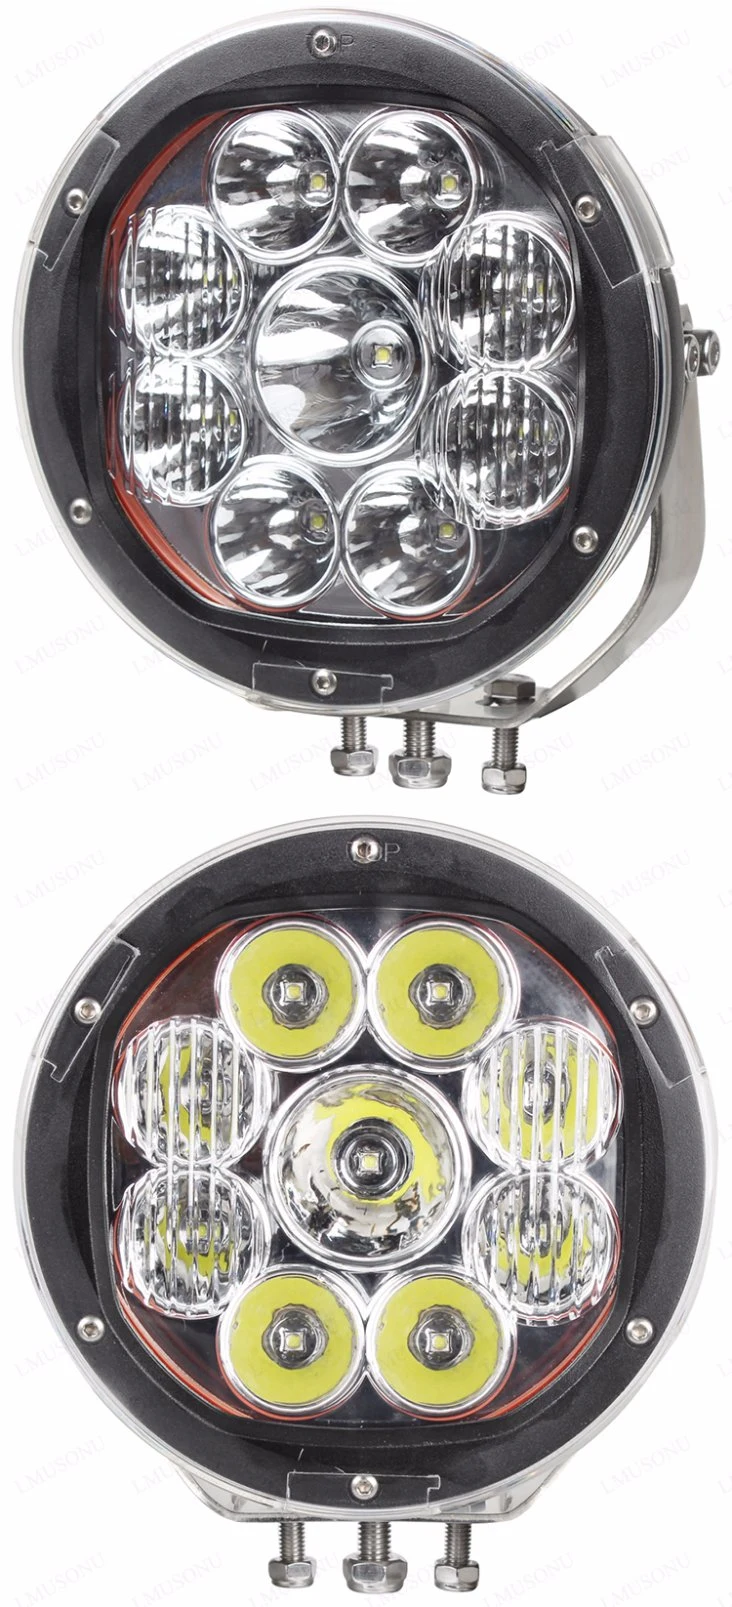 7.0 Inch 15W CREE Car Offroad Work LED Driving Light LED Auto Light 135W